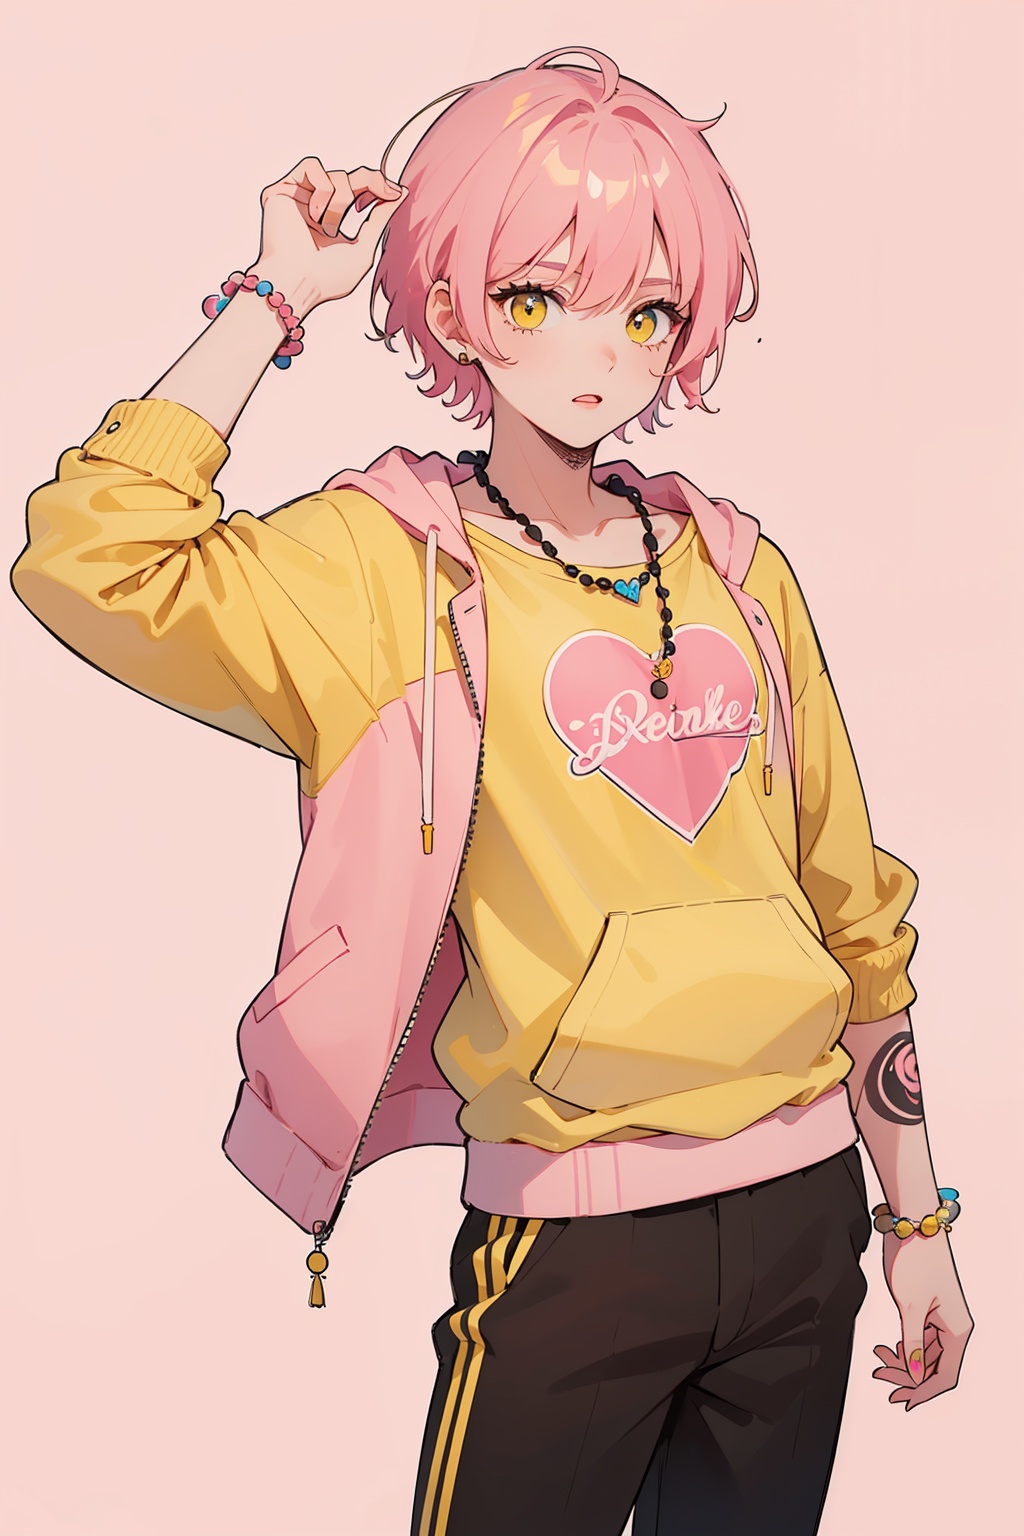 ((a man, pink short hair)) ((Pure pink and yellow background)),A vibrant young man in his early twenties stands confidently,floral jacket. His tattooed arms and beaded necklaces complement his pink hoodie,exuding a lively,retro vibe.,